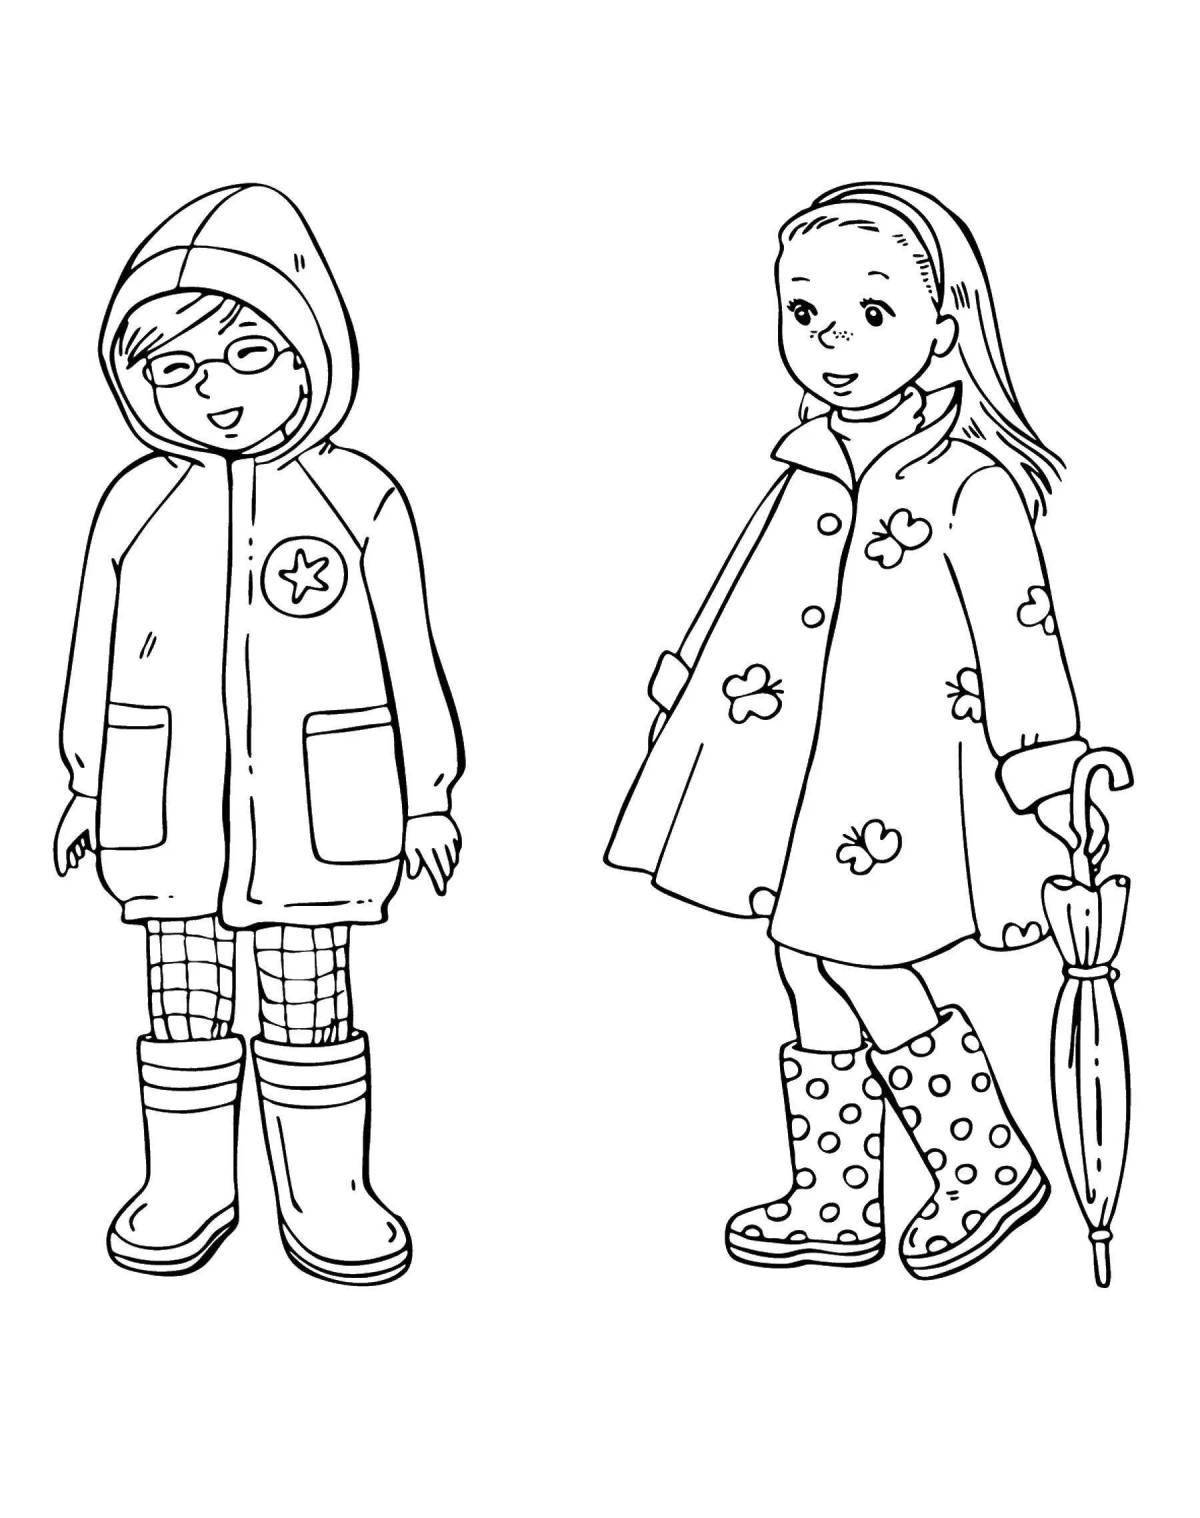 Fancy clothes and shoes coloring page